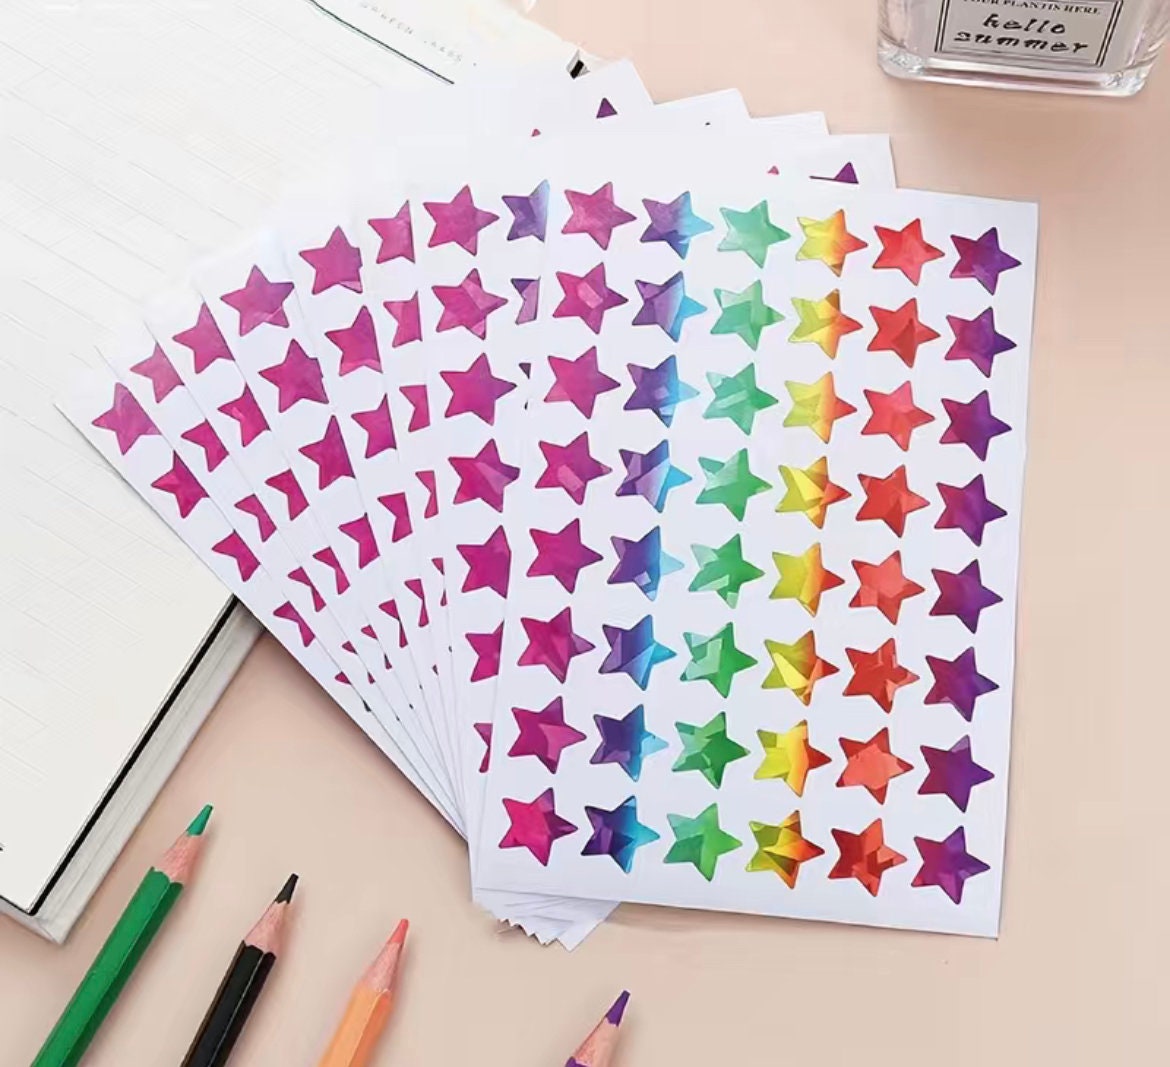 Star shaped craft stickers, 15mm holographic